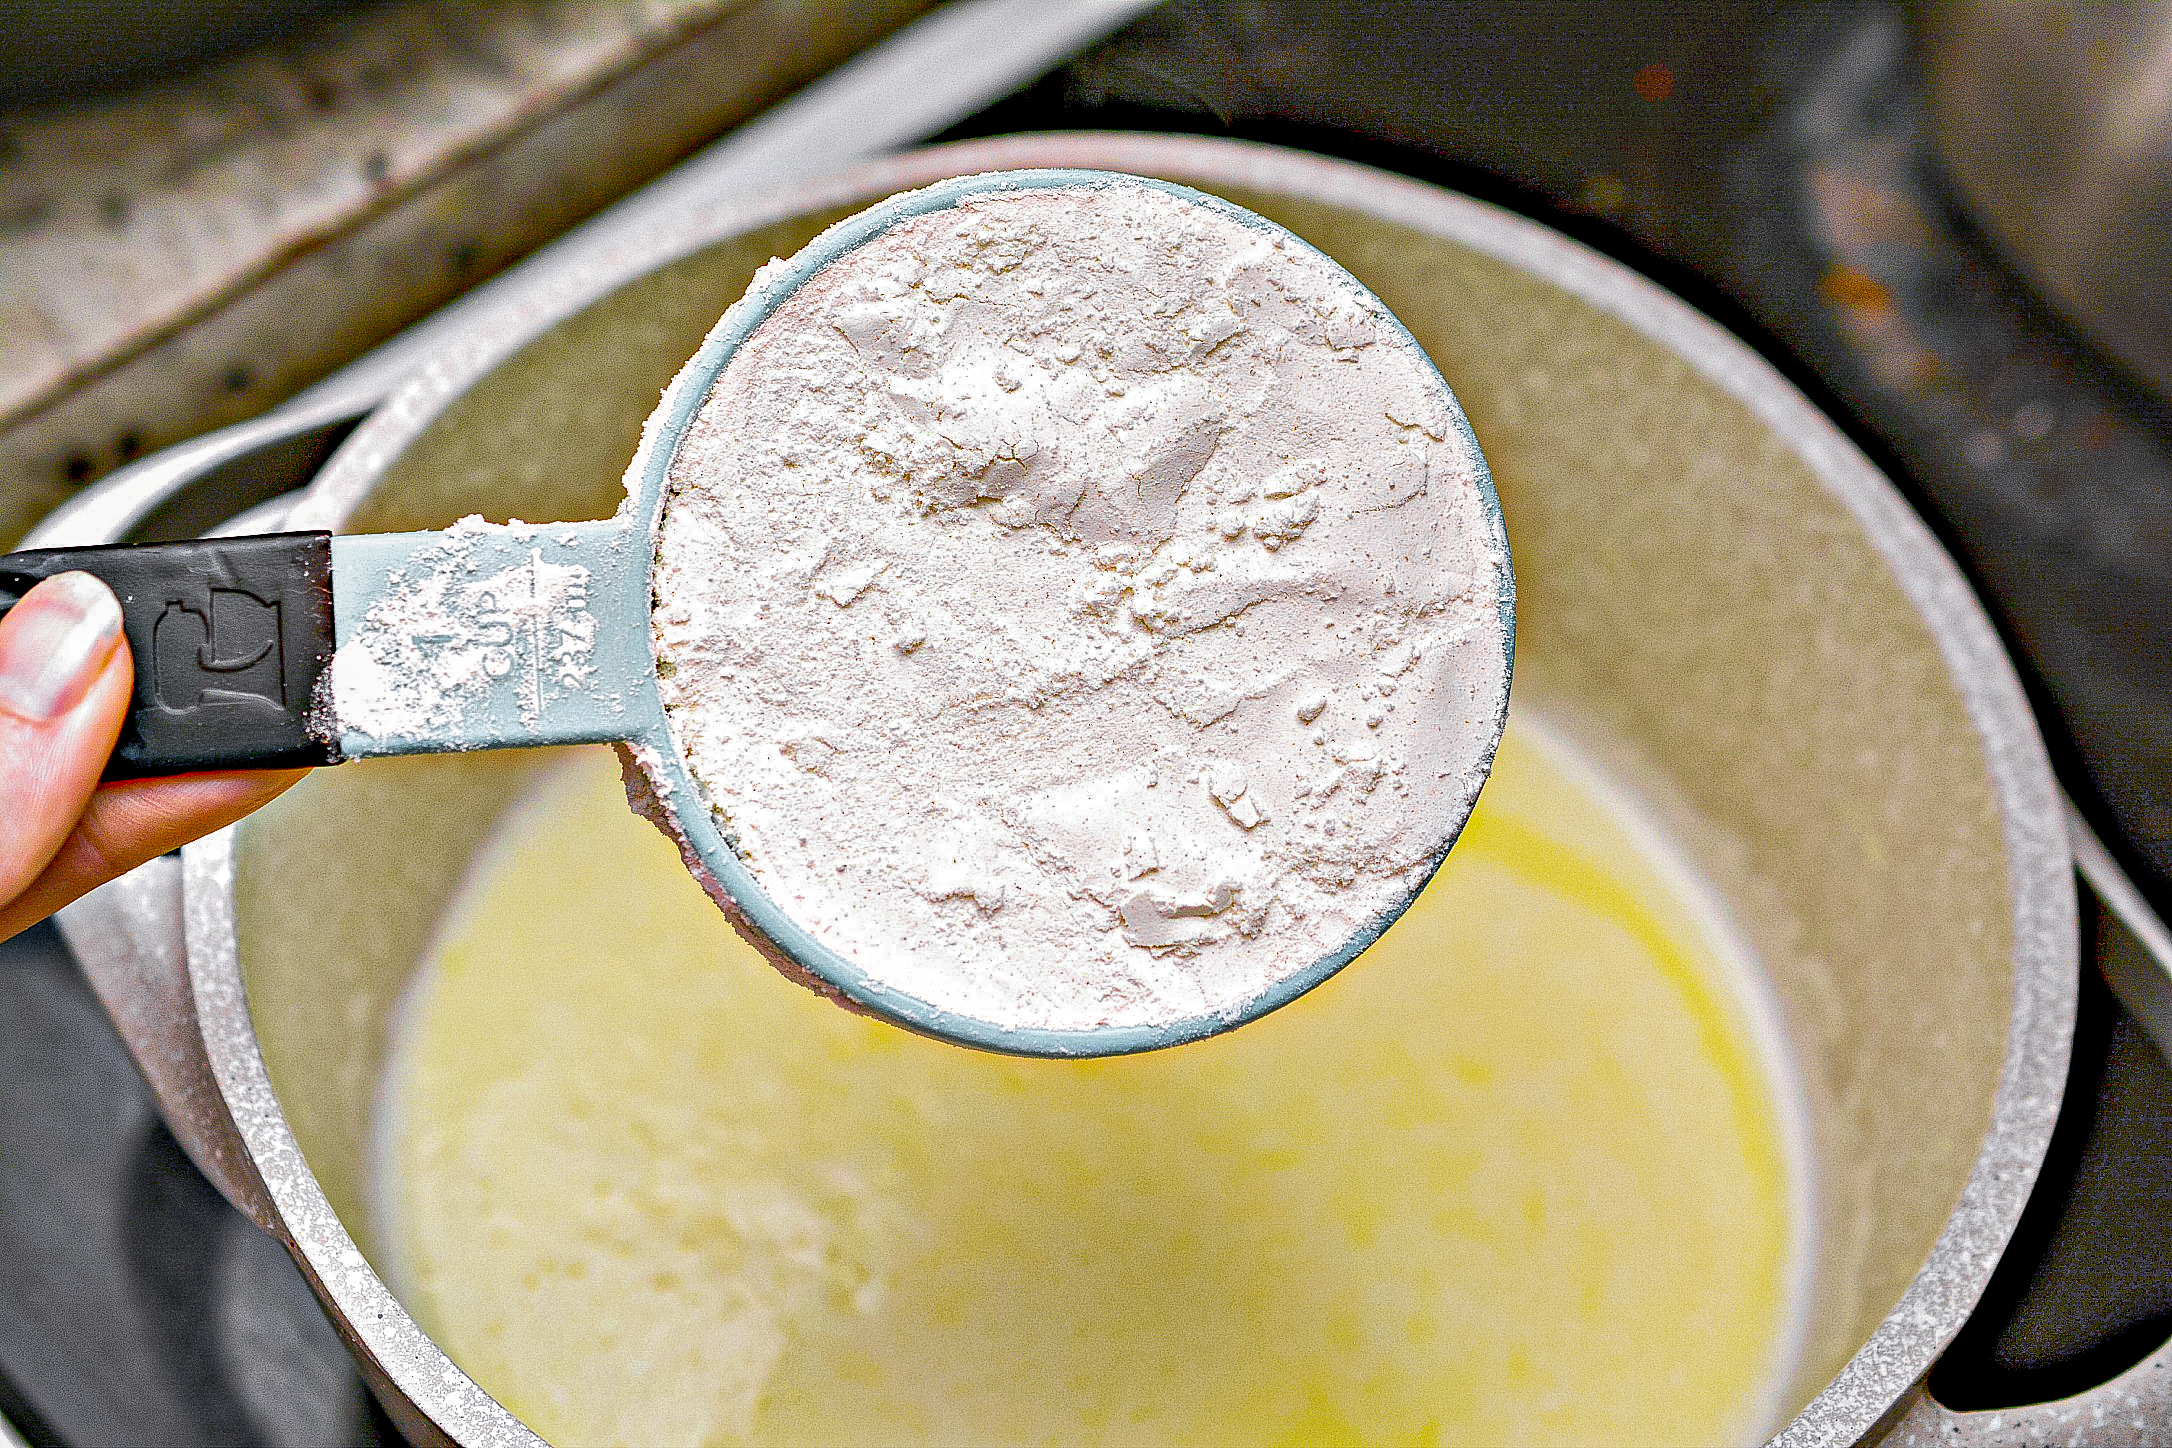 Remove the saucepan from the heat, and quickly stir in the flour until completely combined and smooth.